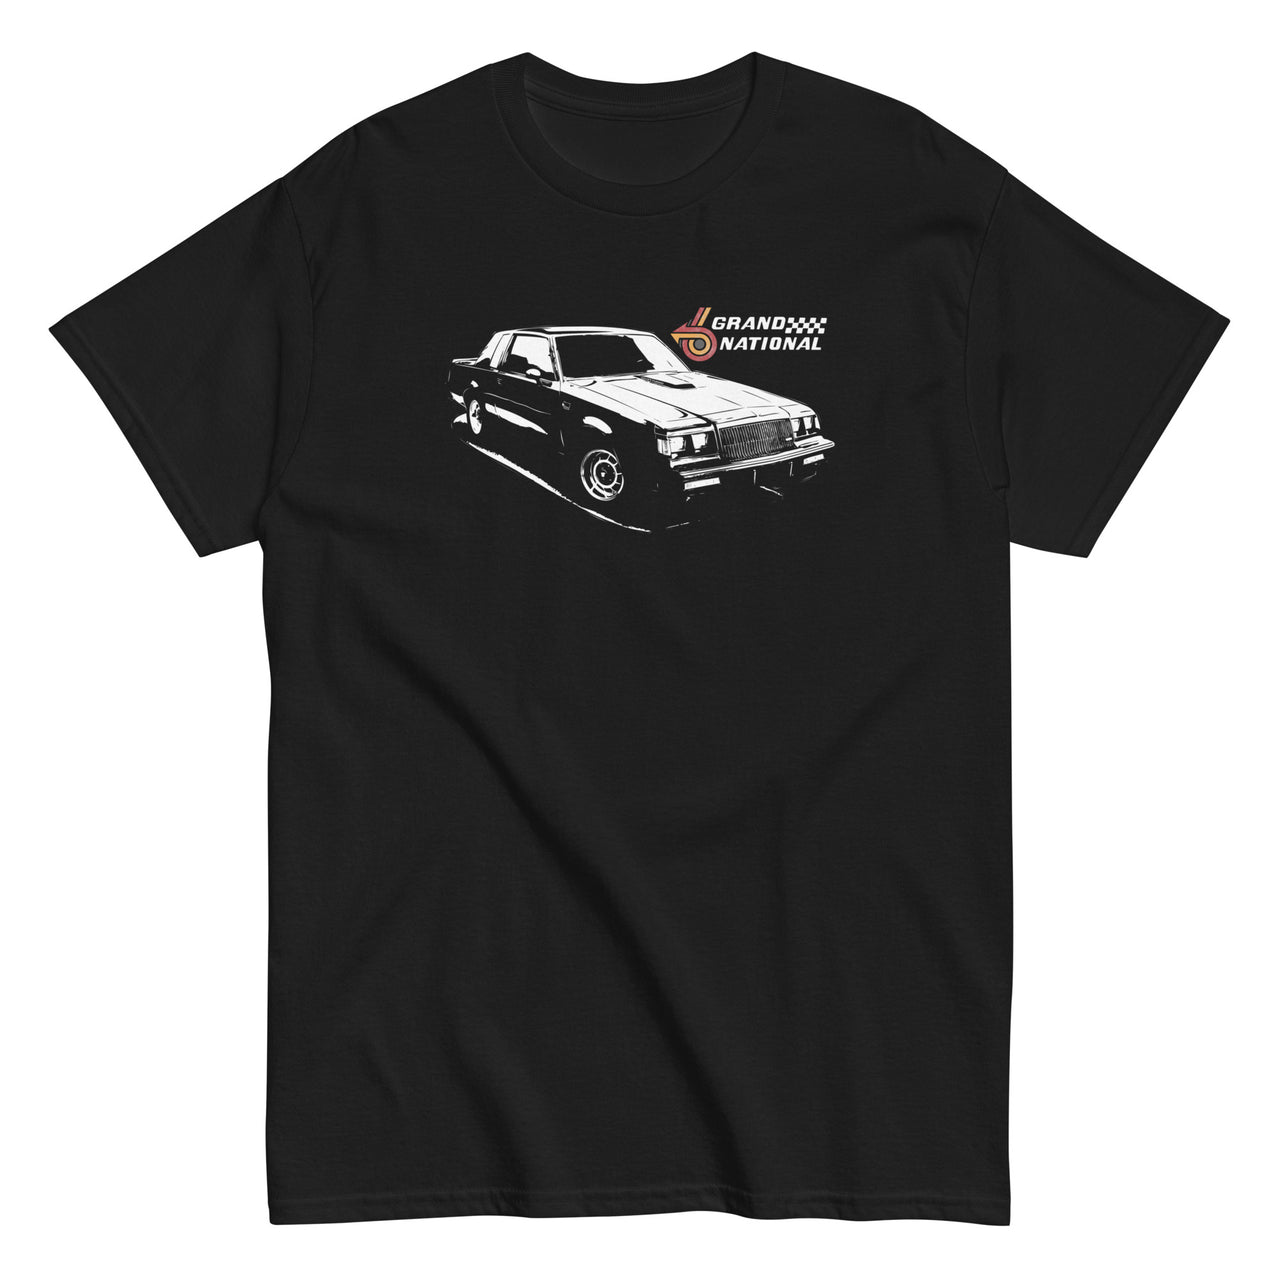 Grand National T-Shirt in Black